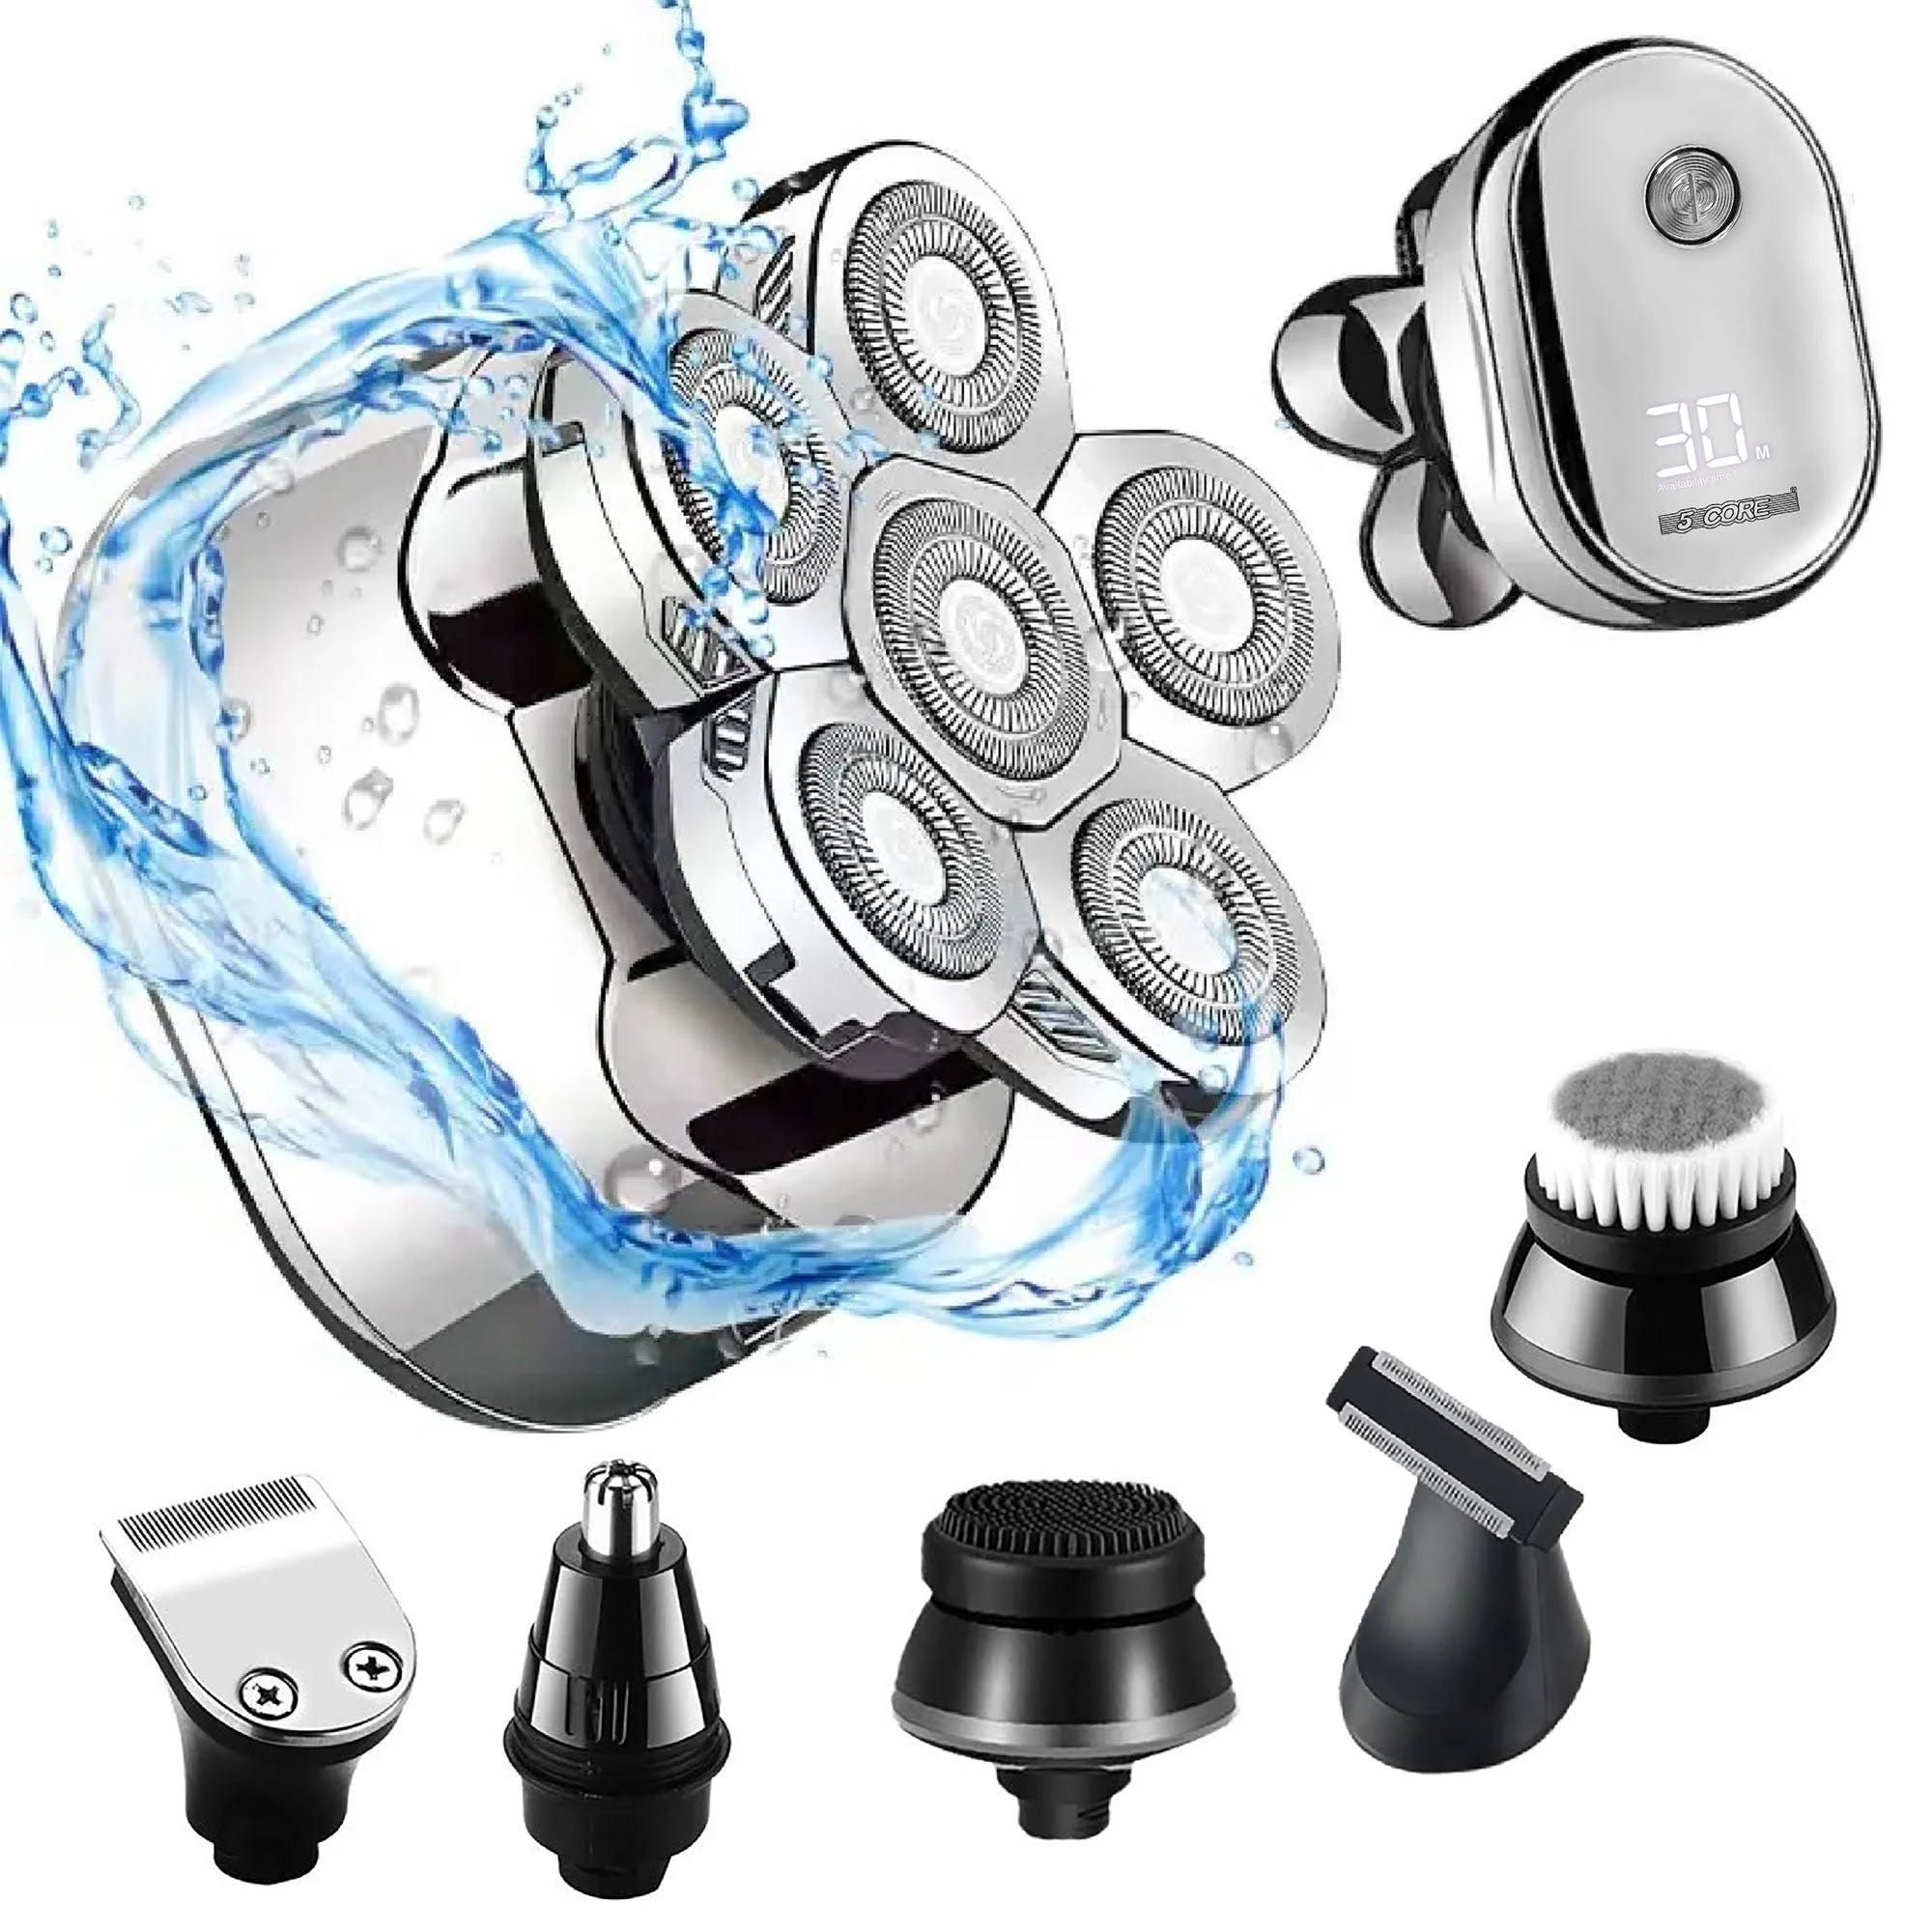 Comfortable 5 Core Rotary Electric Shaver for Dry and Wet Shaves | Image